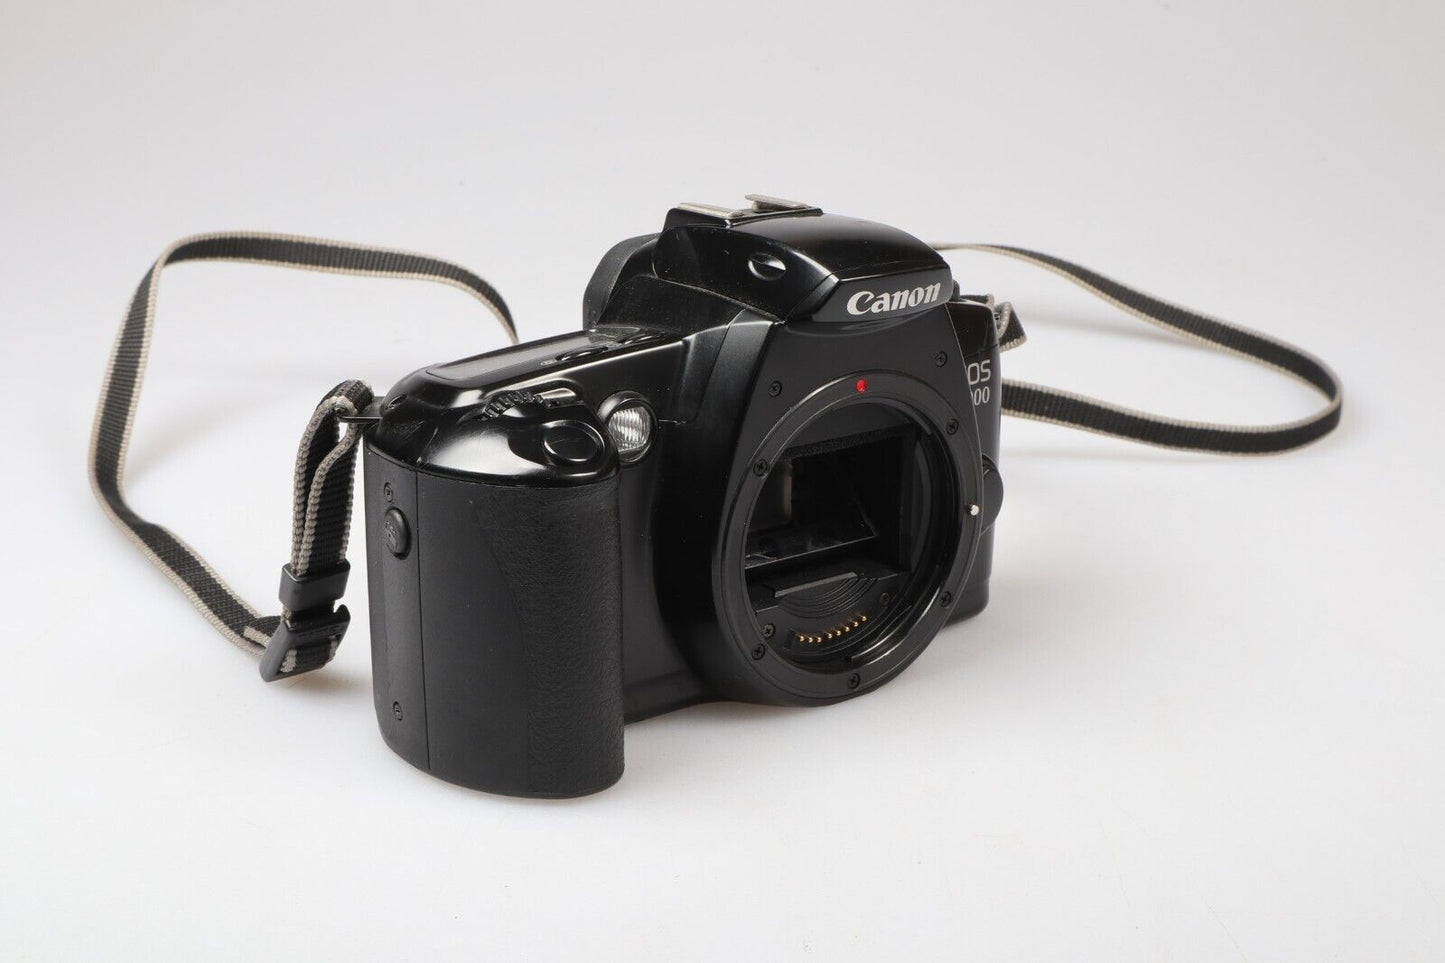 Canon EOS 3000 | 35mm SLR Film Camera | Body Only